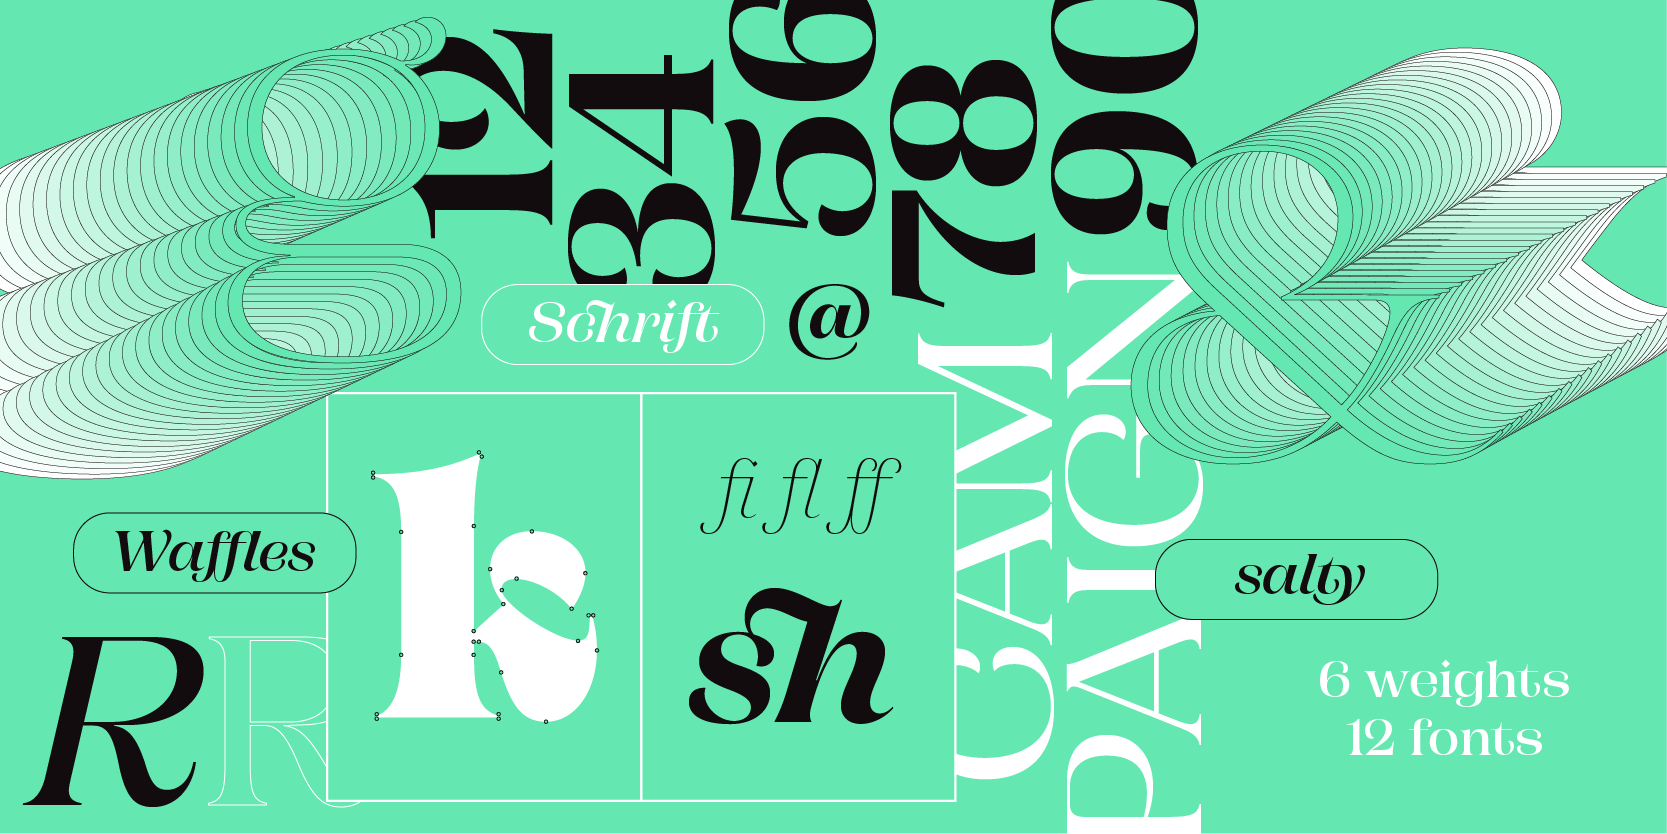 Card displaying Campaign Serif typeface in various styles